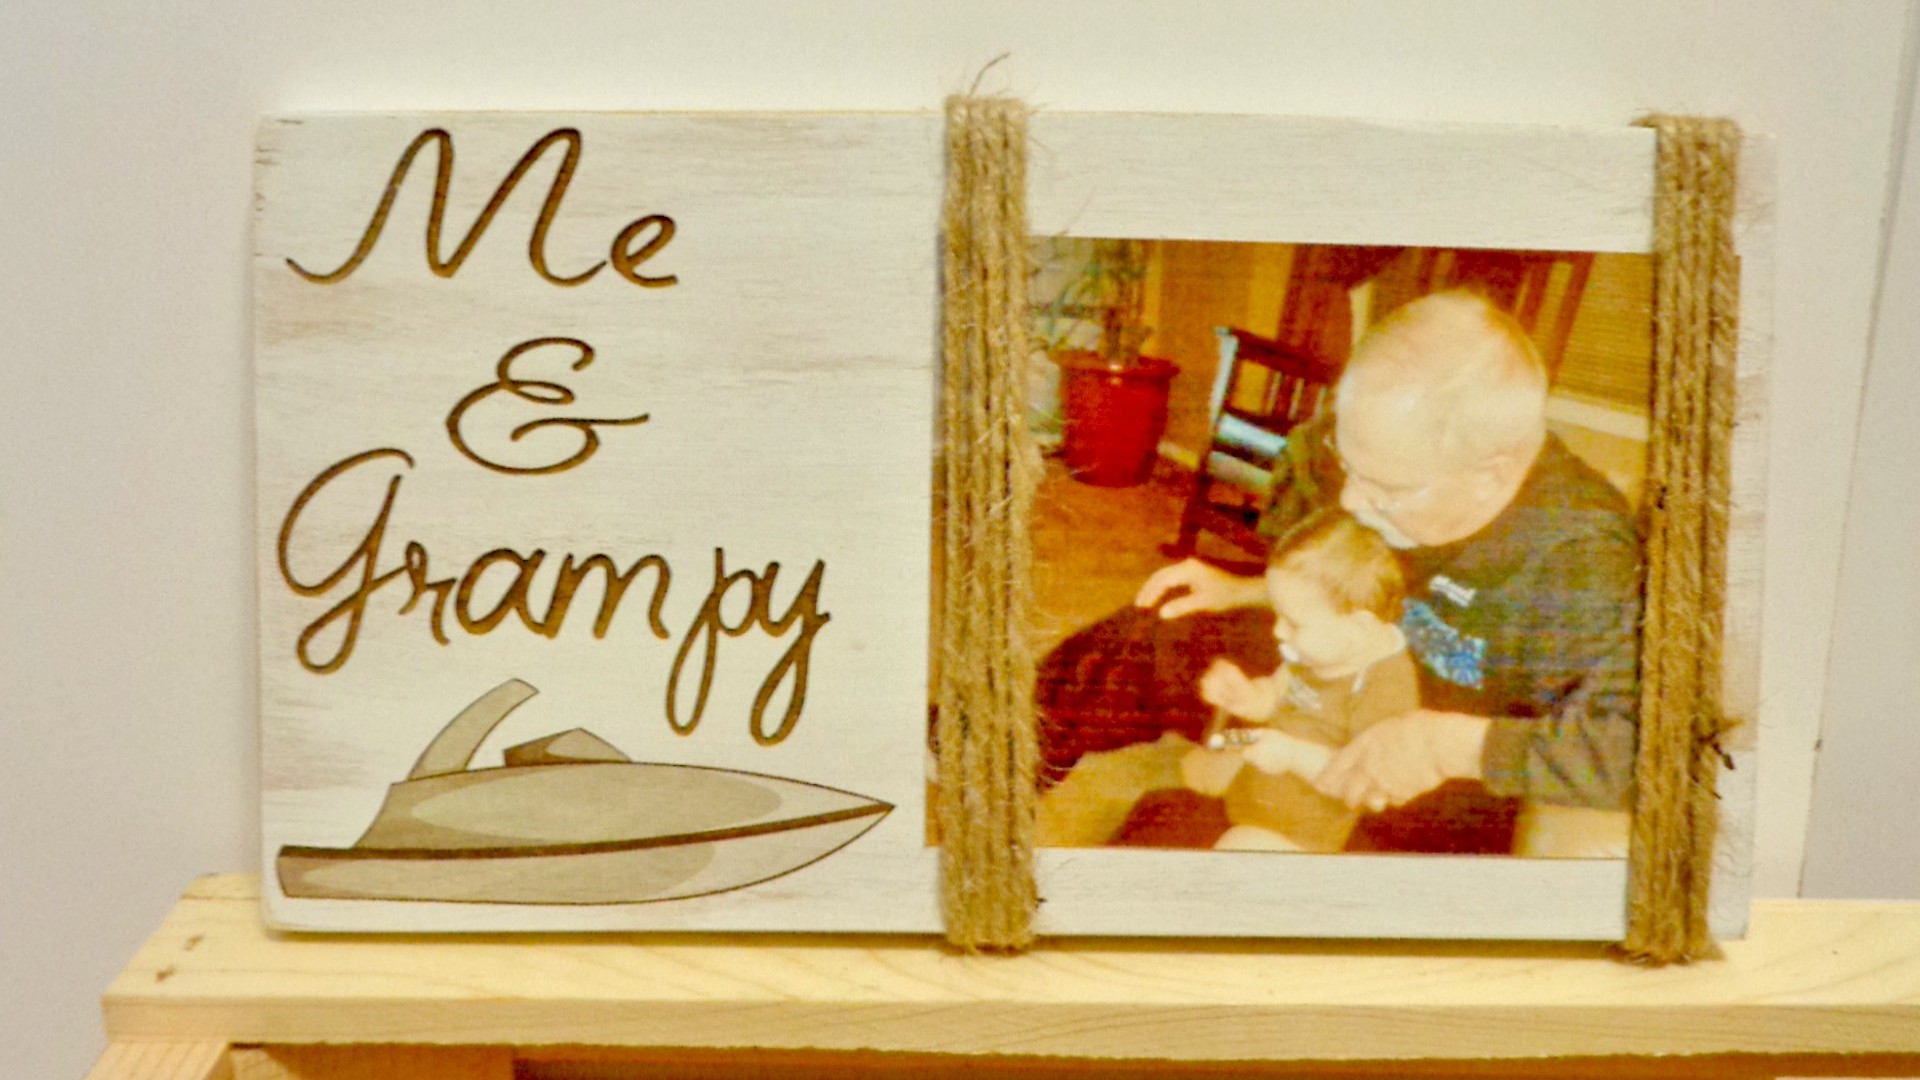 PERSONALIZED Fishing Makes the Best Memories Picture Frame. Ideal